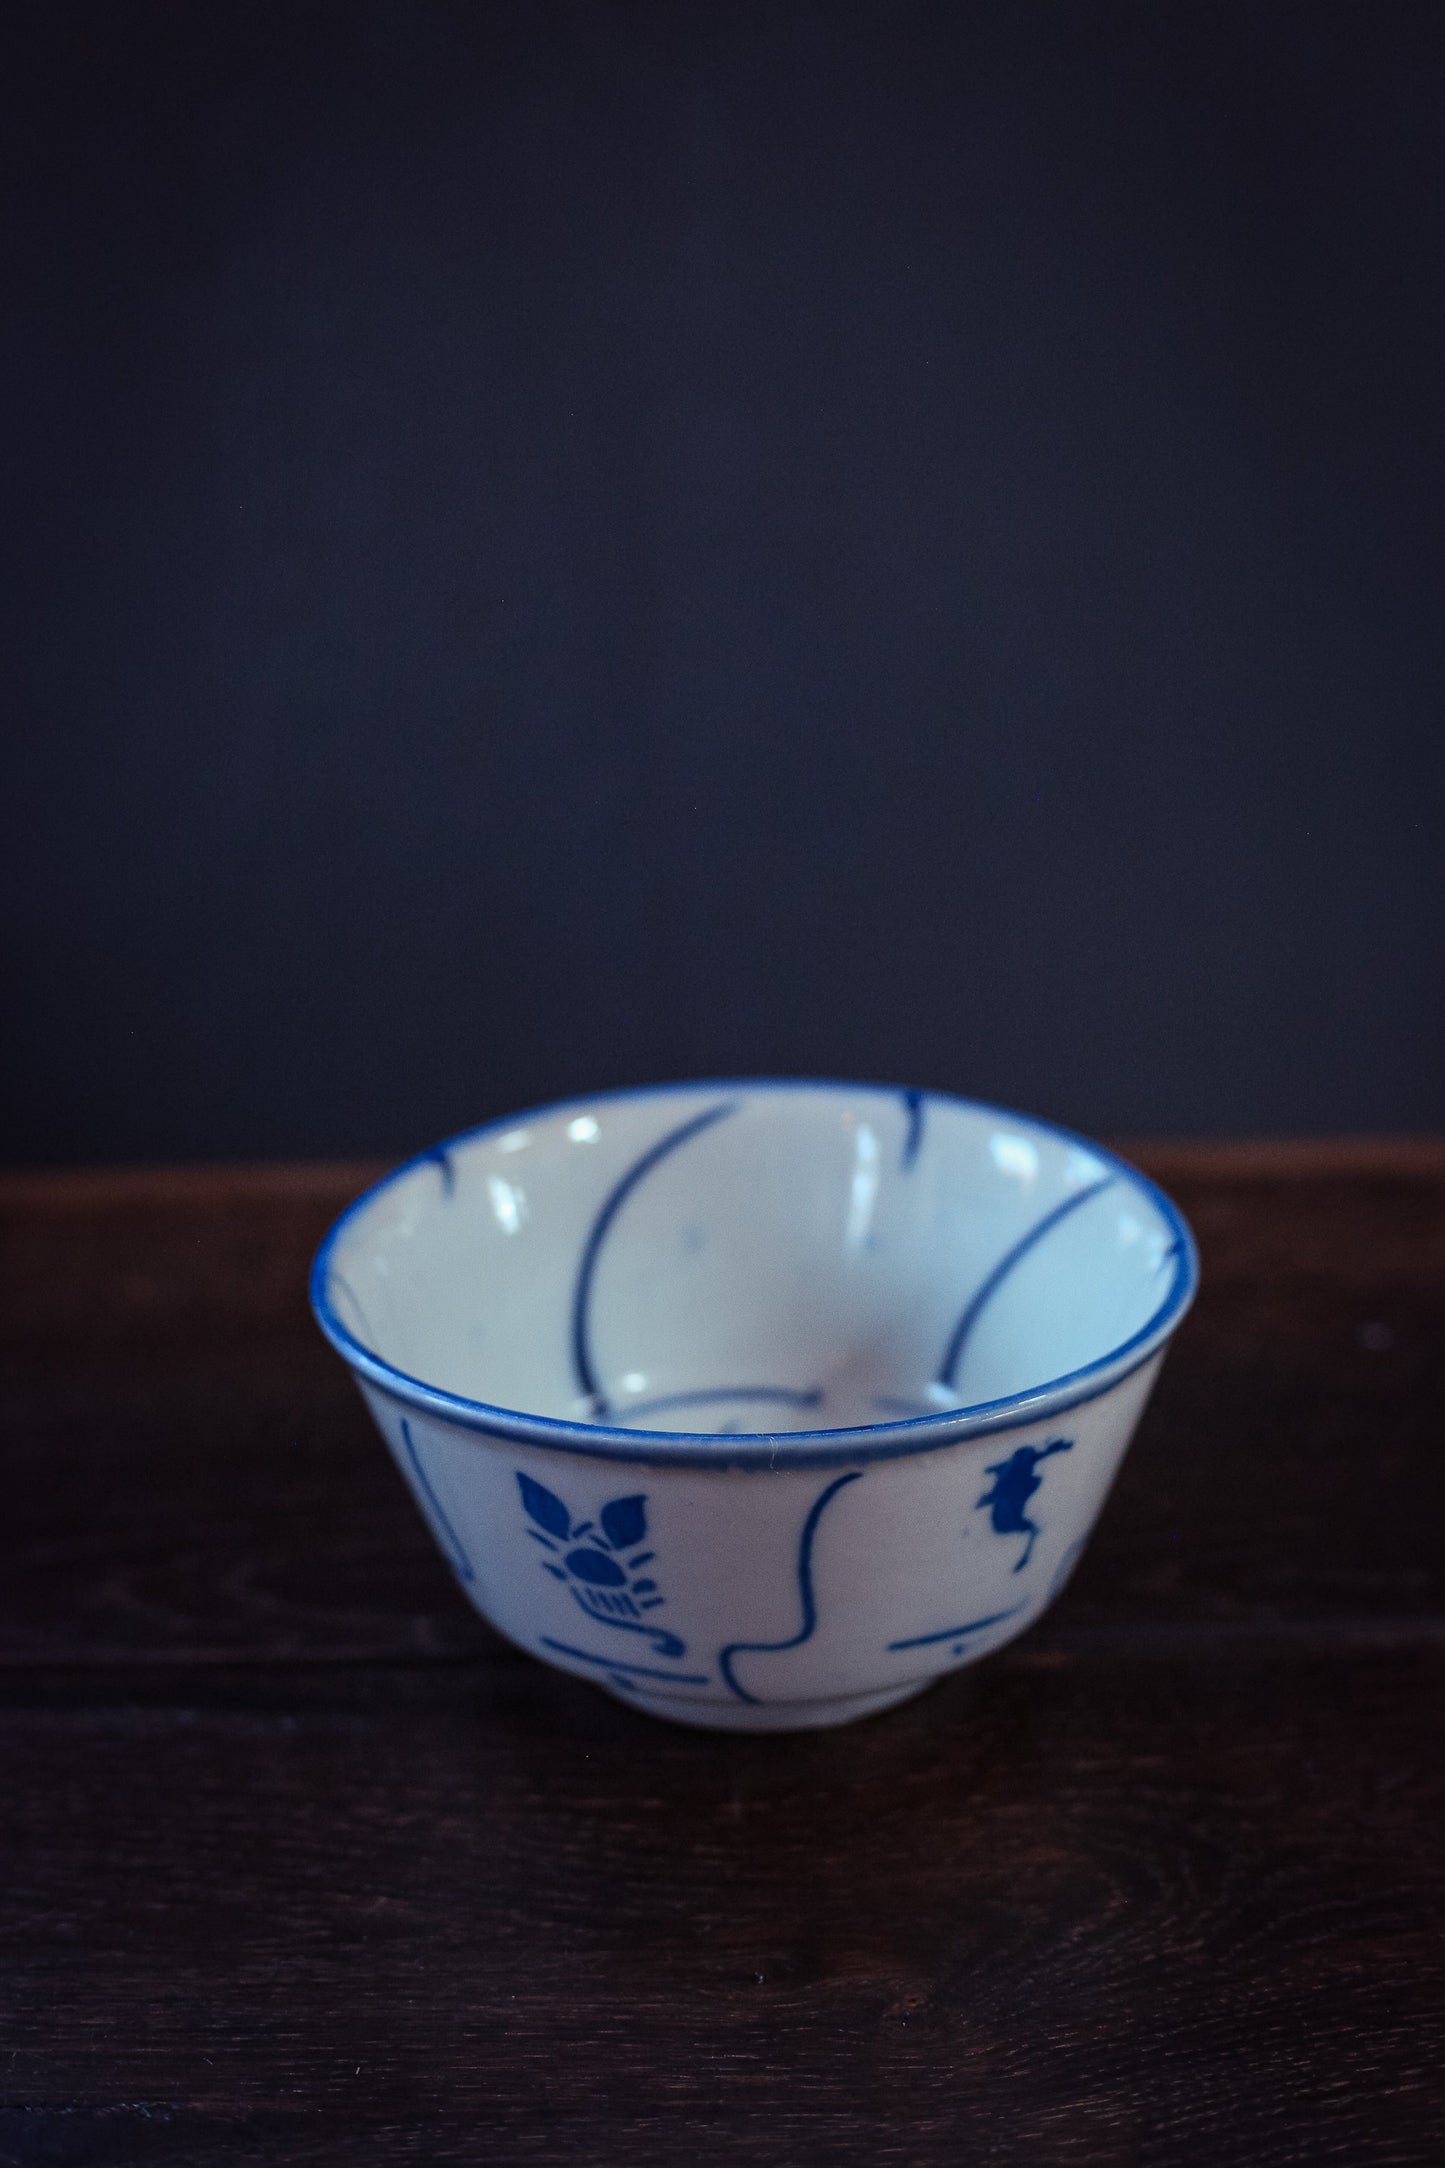 Hand Painted Blue and White Chinese Soup Bowl - Vintage Hand Painted Ceramic Bowl